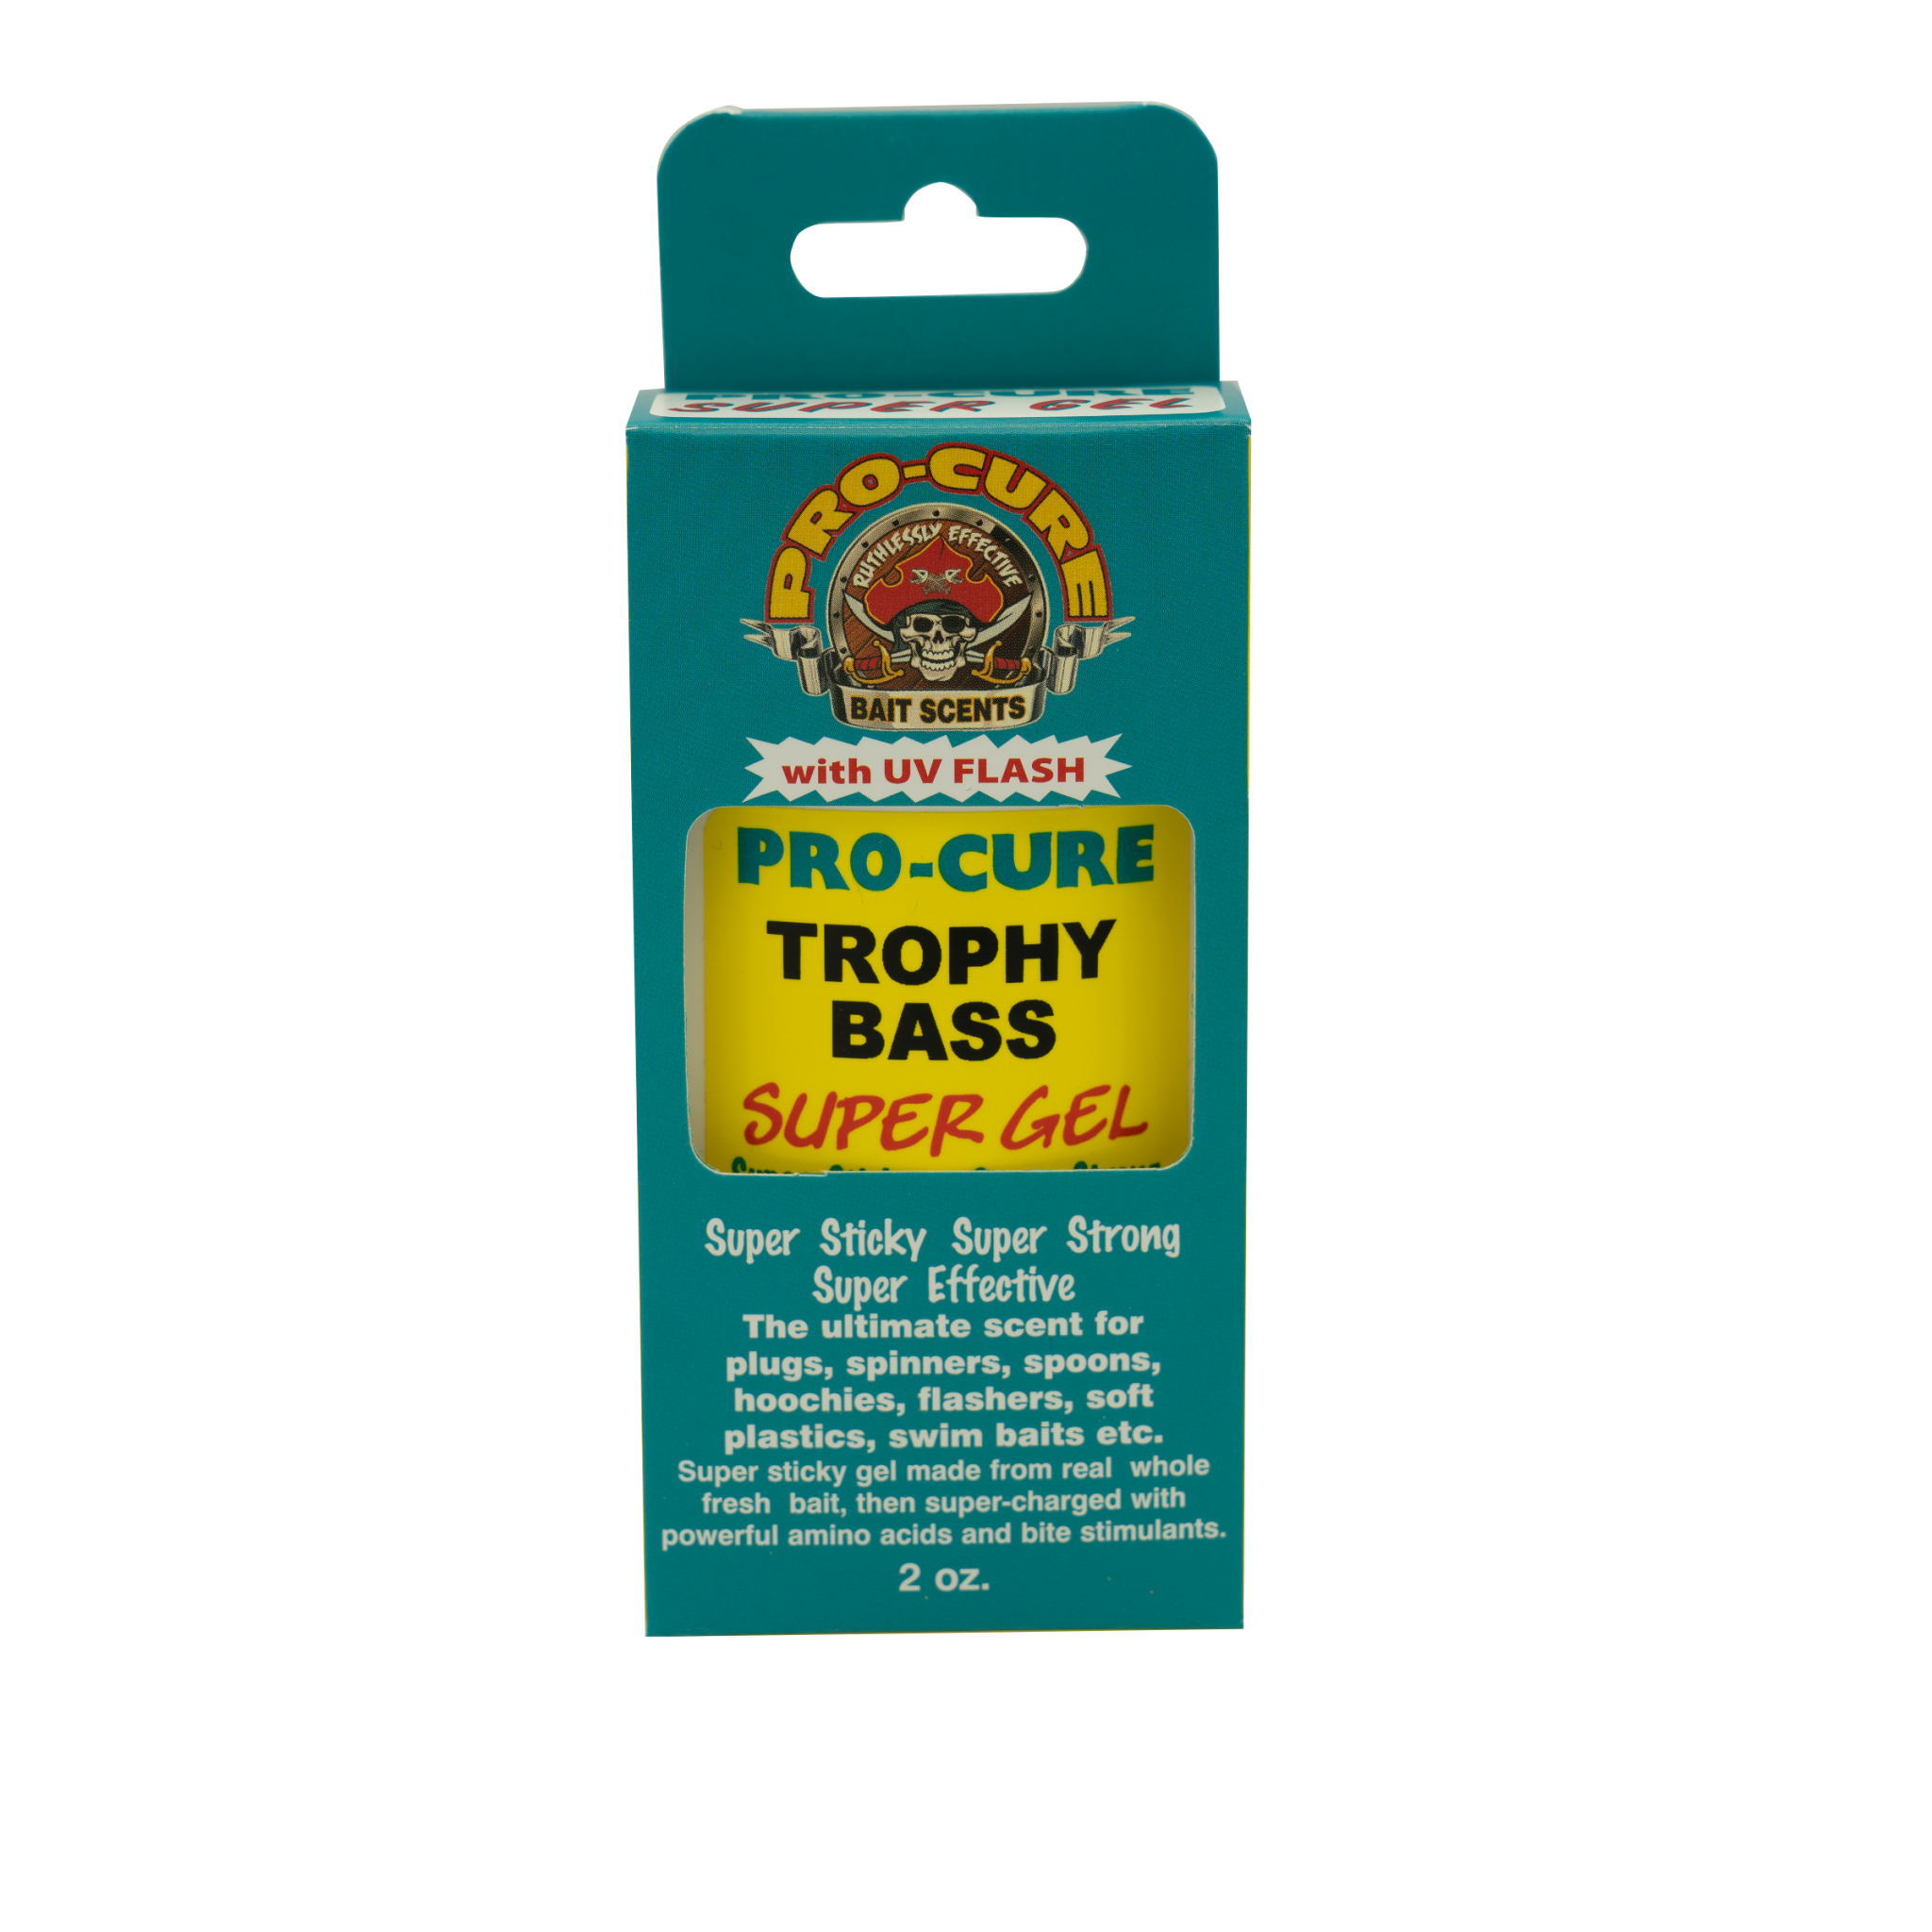 Pro-Cure Crappie & Panfish Magic Super Gel, 2 Ounce, Attractants -   Canada